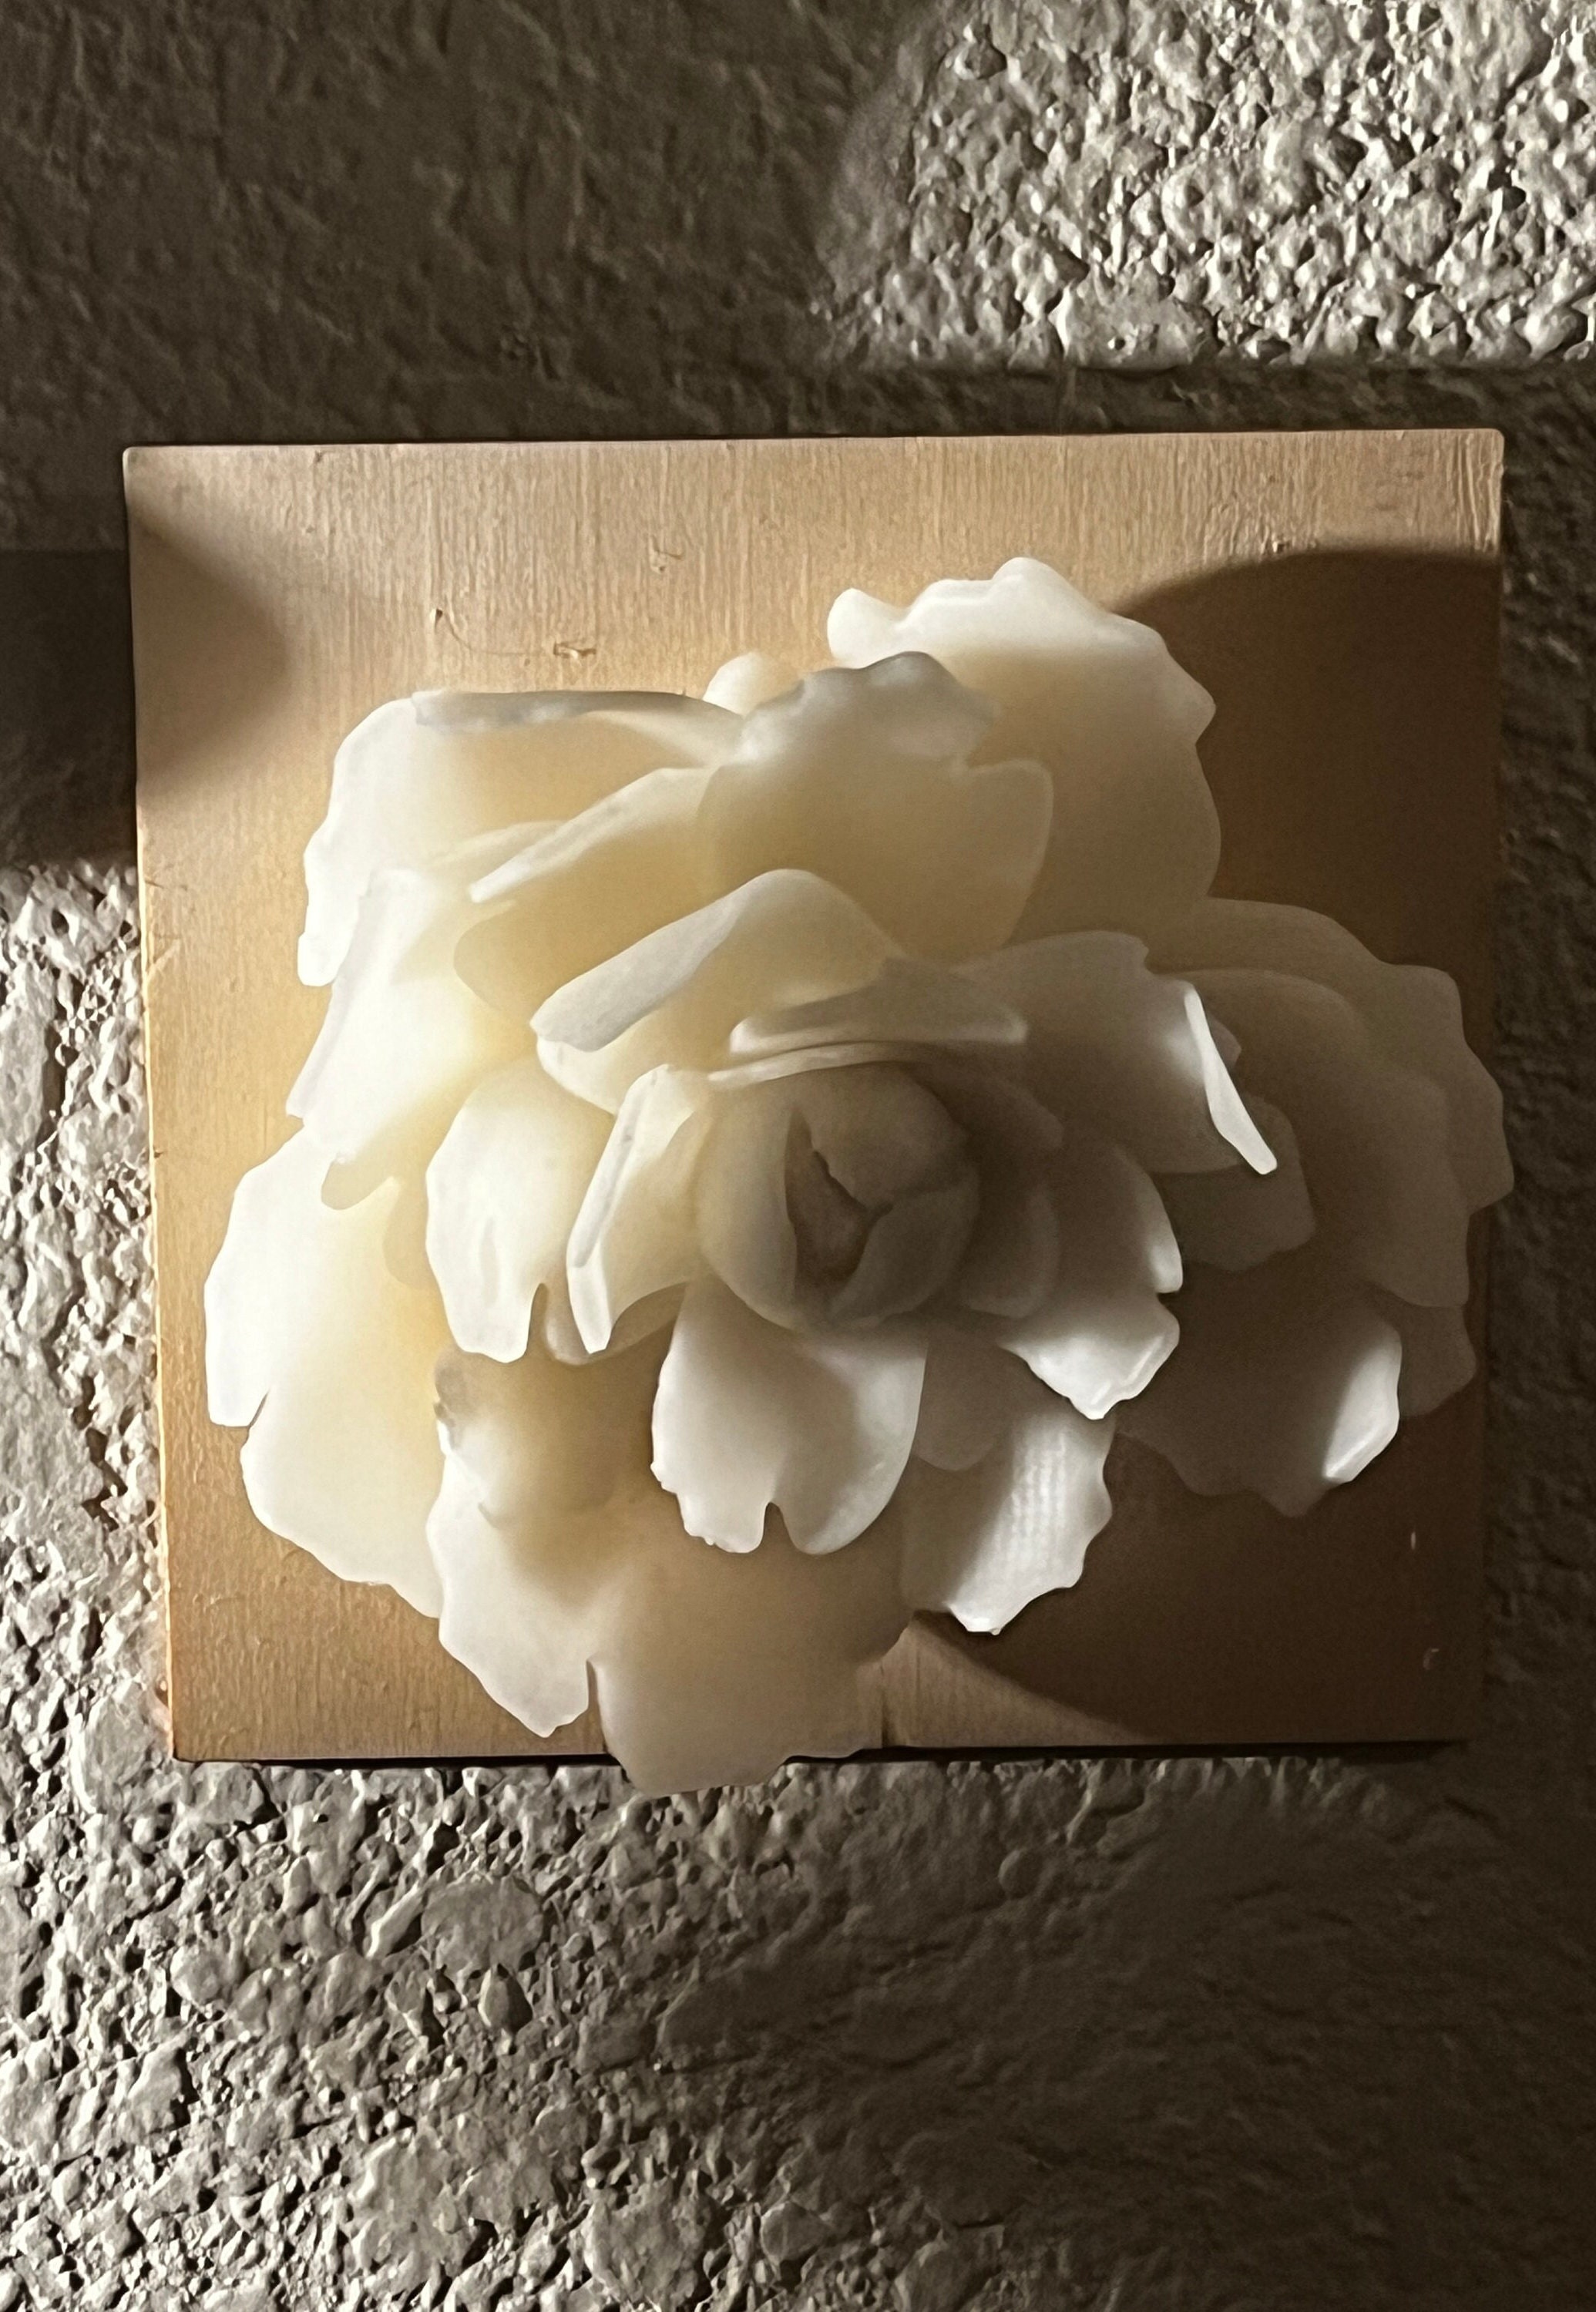 Flowers Wall Sculpture White Clay Floral Clay Tile Modern